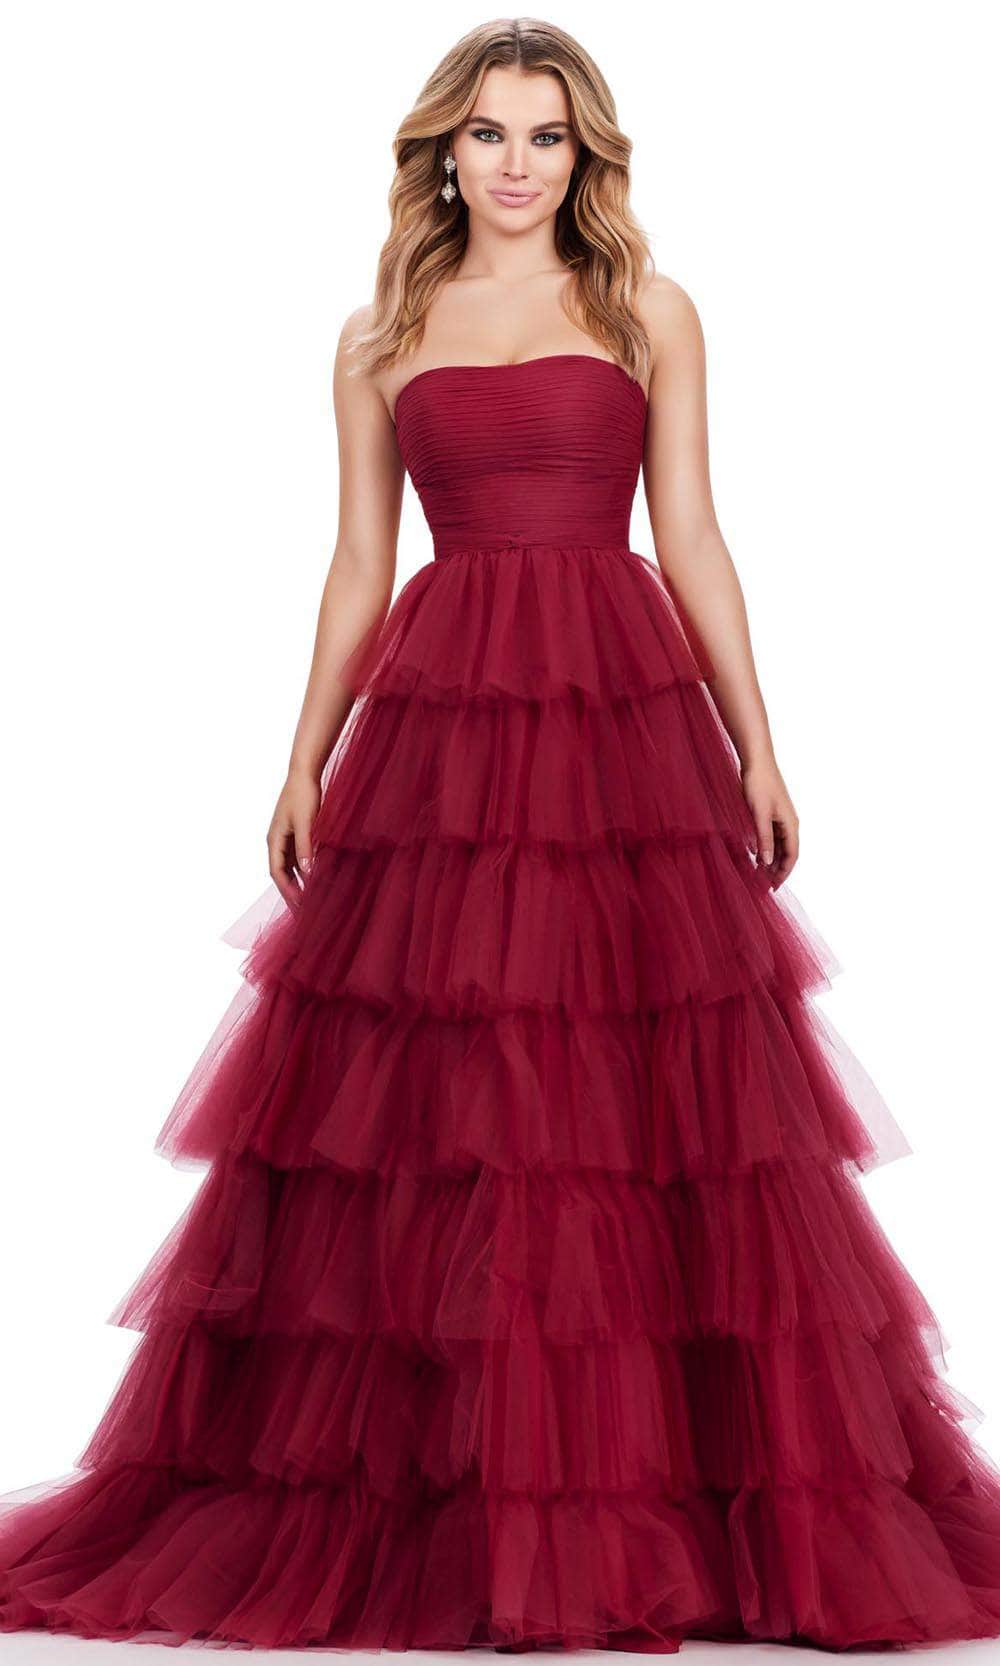 Image of Ashley Lauren 11621 - Tulle Tiered Prom Dress